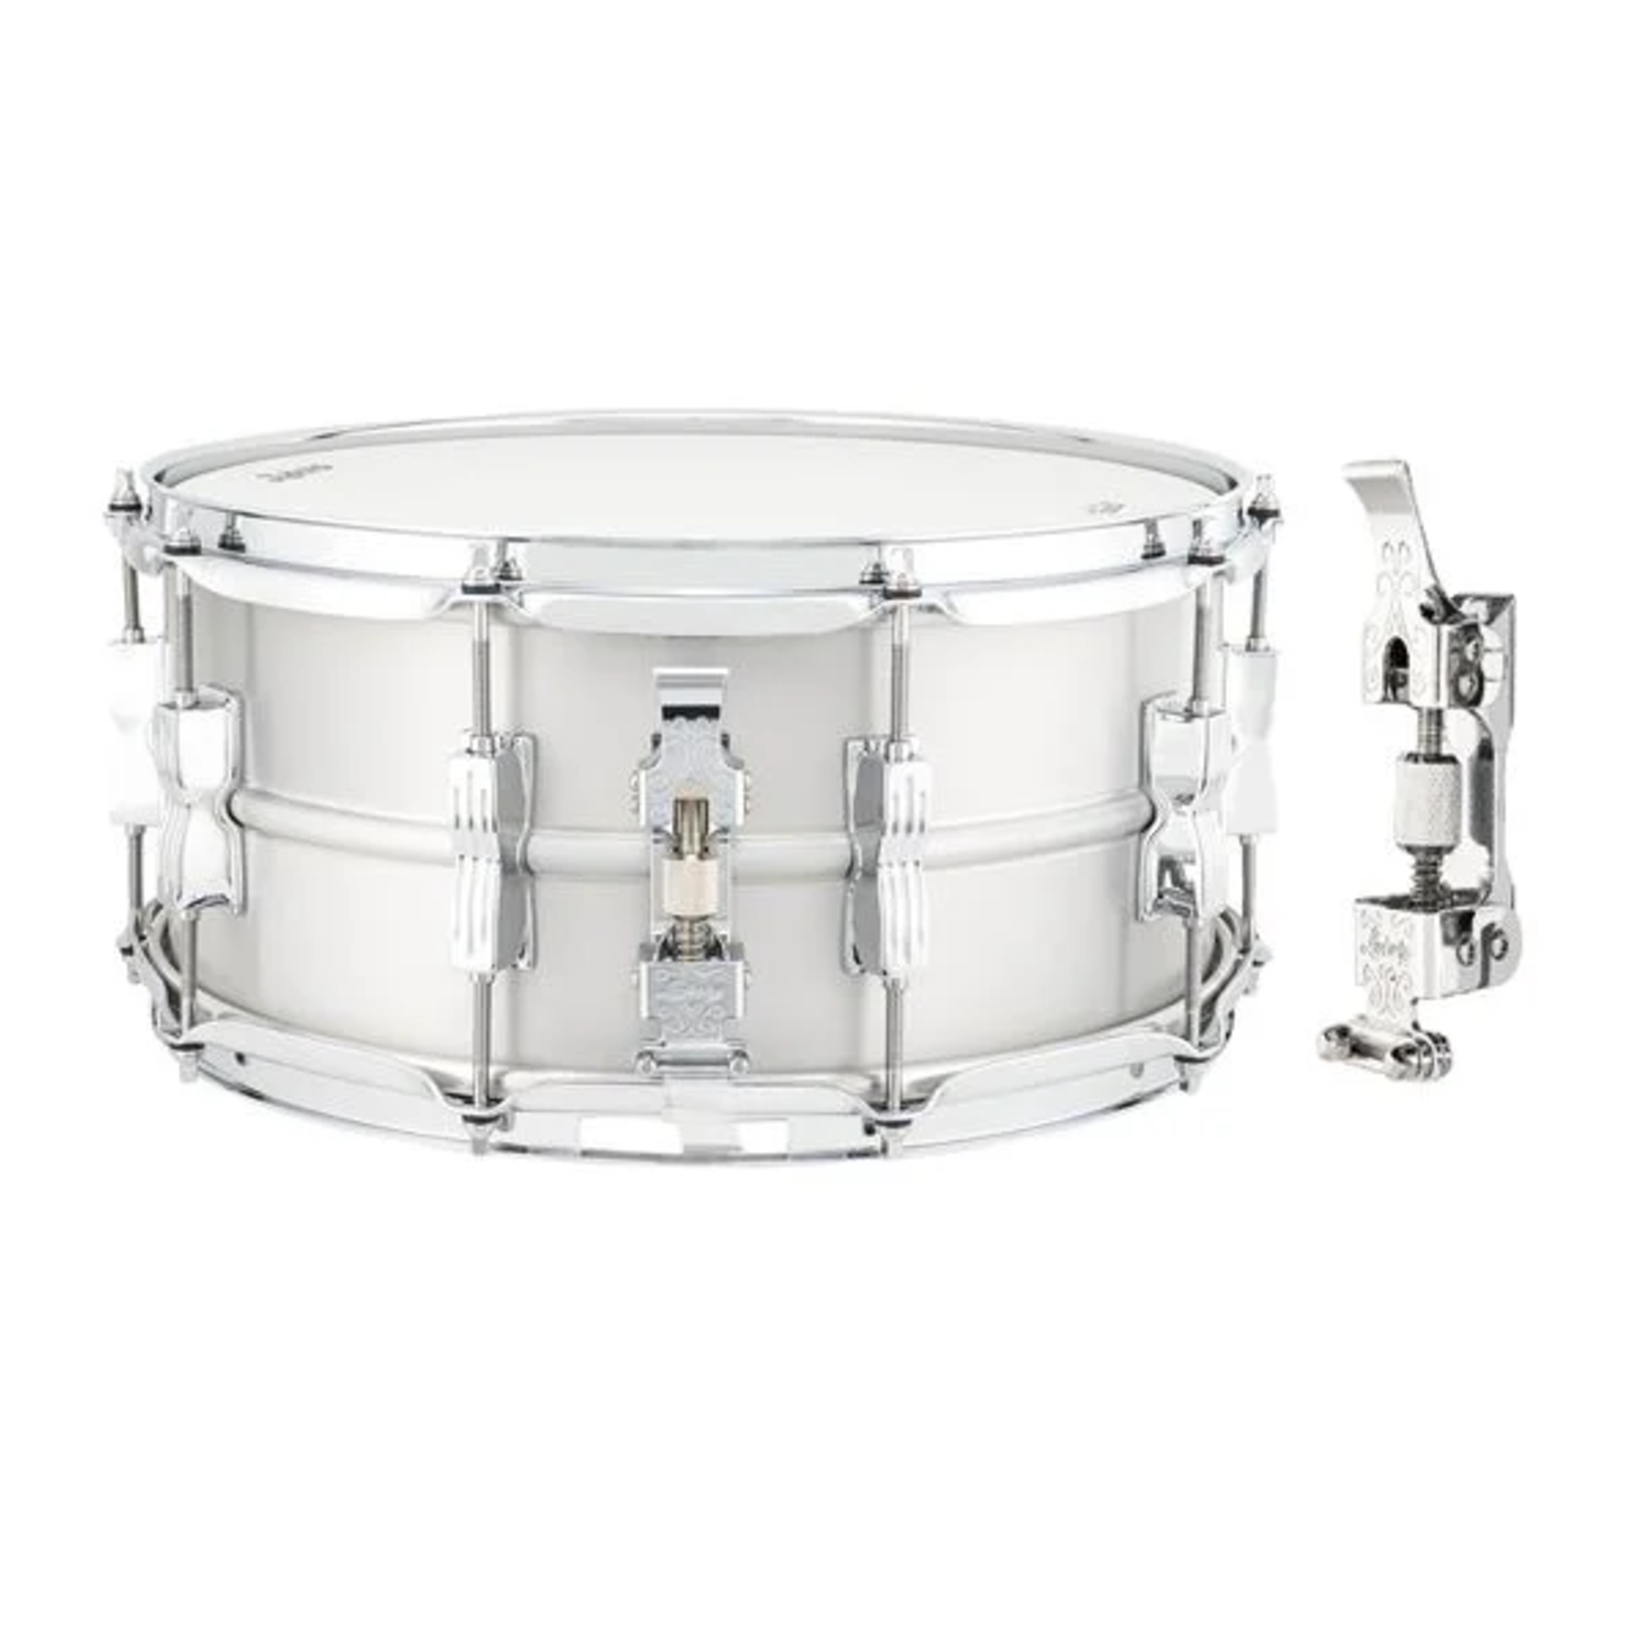 Ludwig Ludwig 6.5x14" Acrolite Snare Drum (with Twin Lugs and P86C Throw-Off) LA654BM